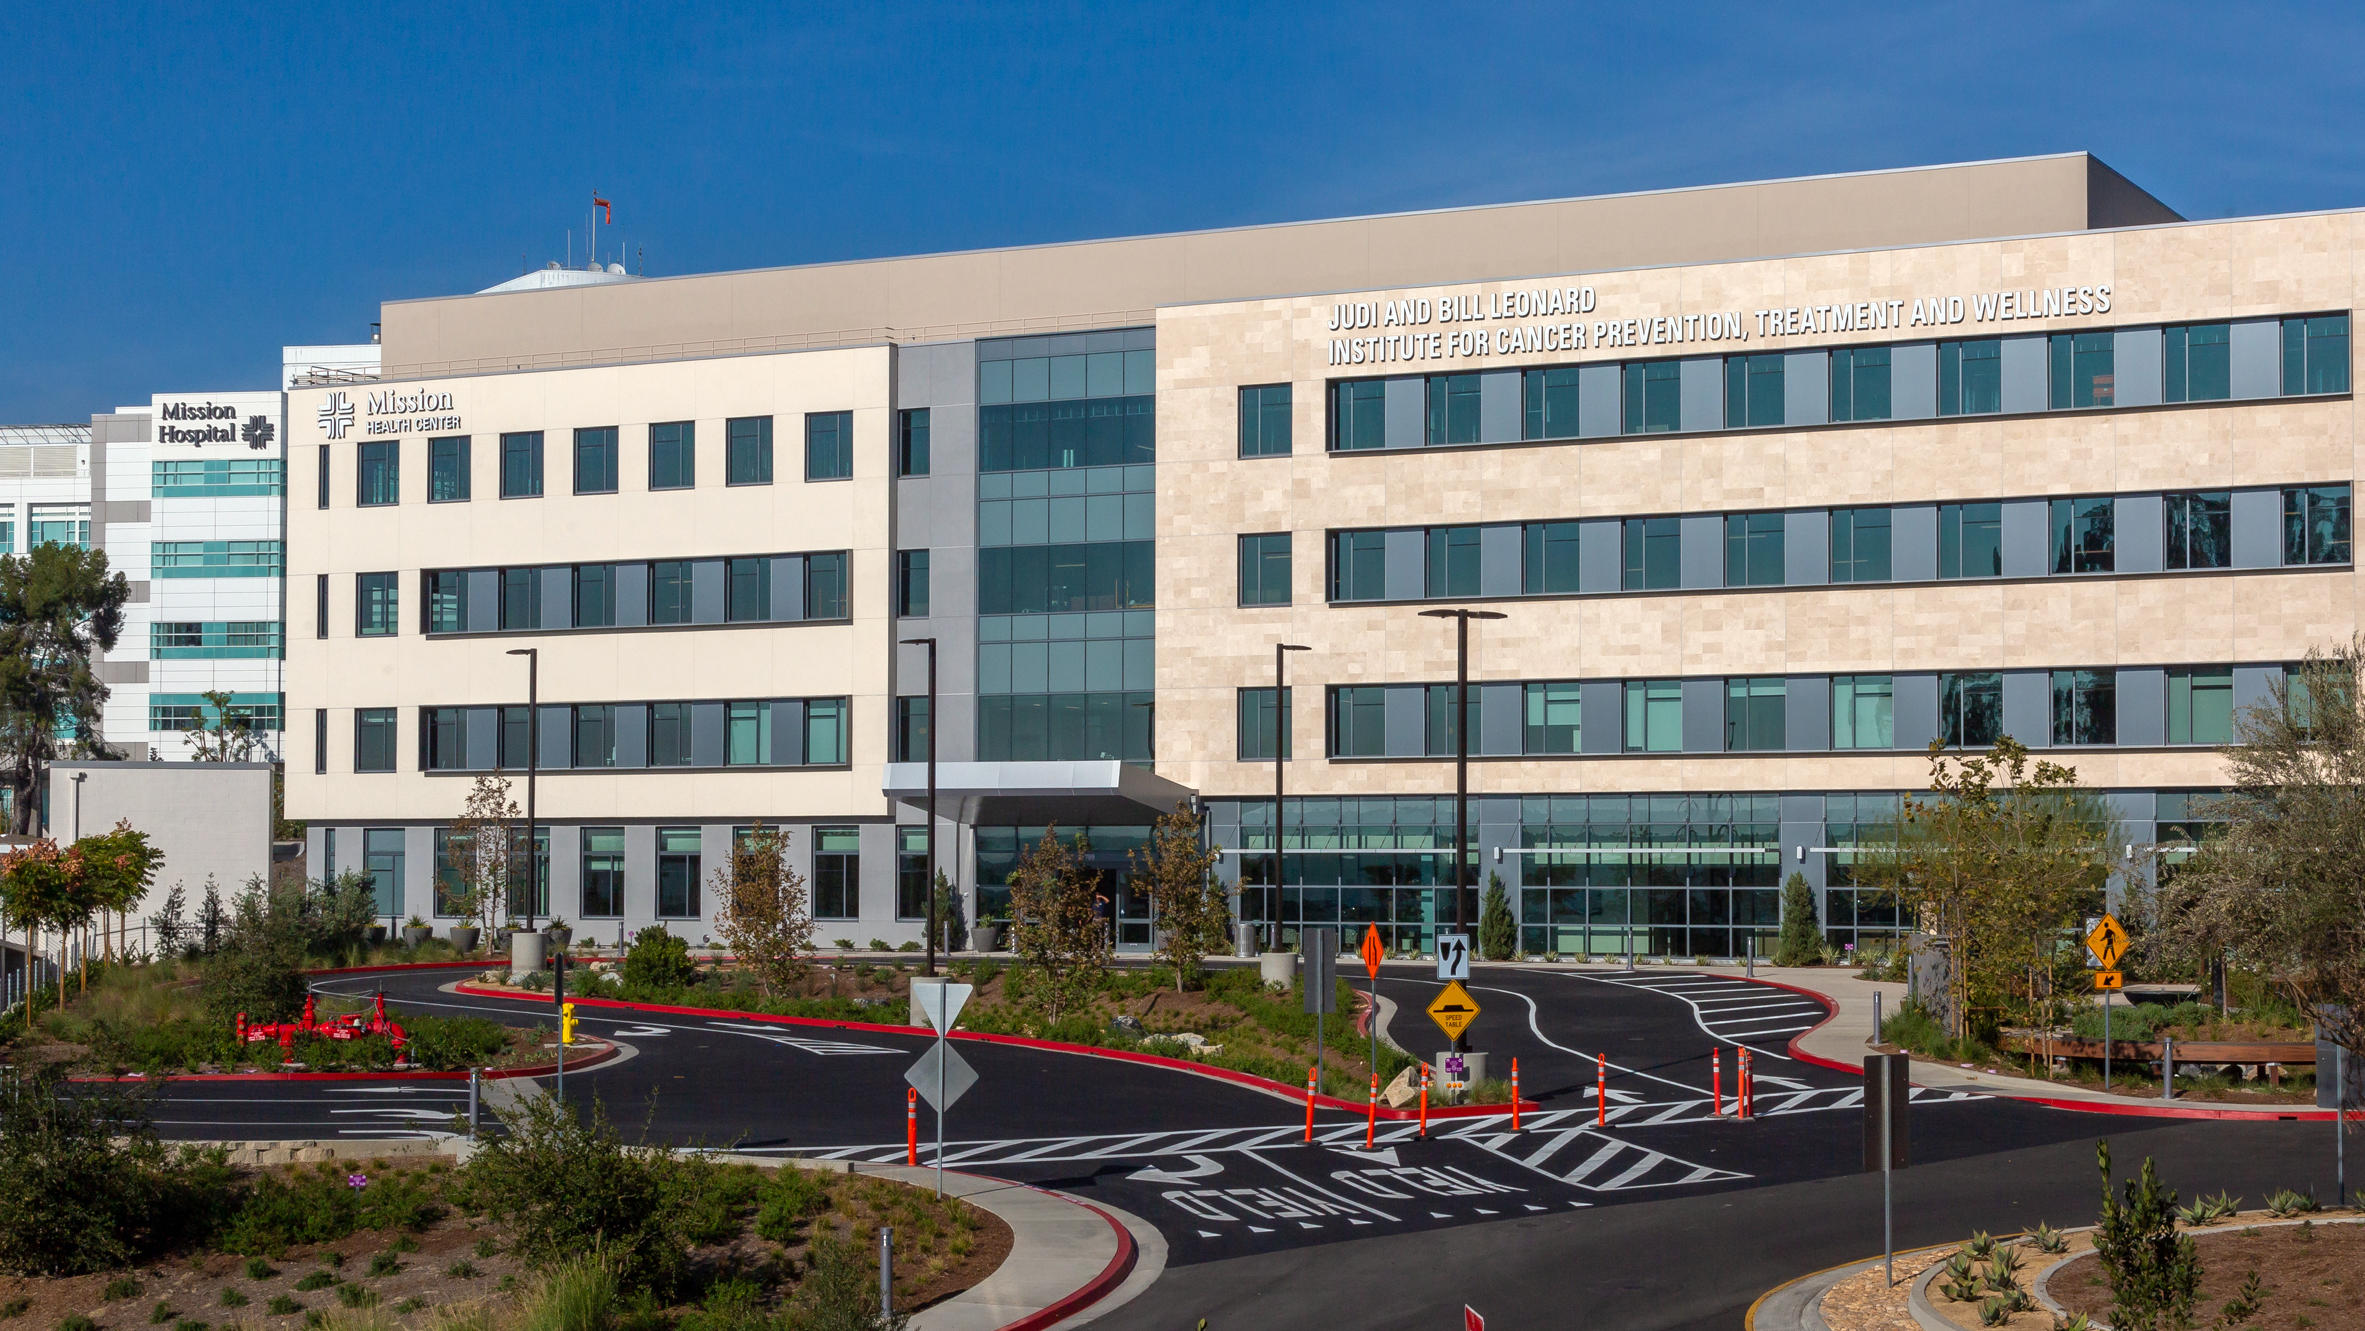 The Judi and Bill Leonard Cancer Institute for Cancer Prevention, Treatment and Wellness.